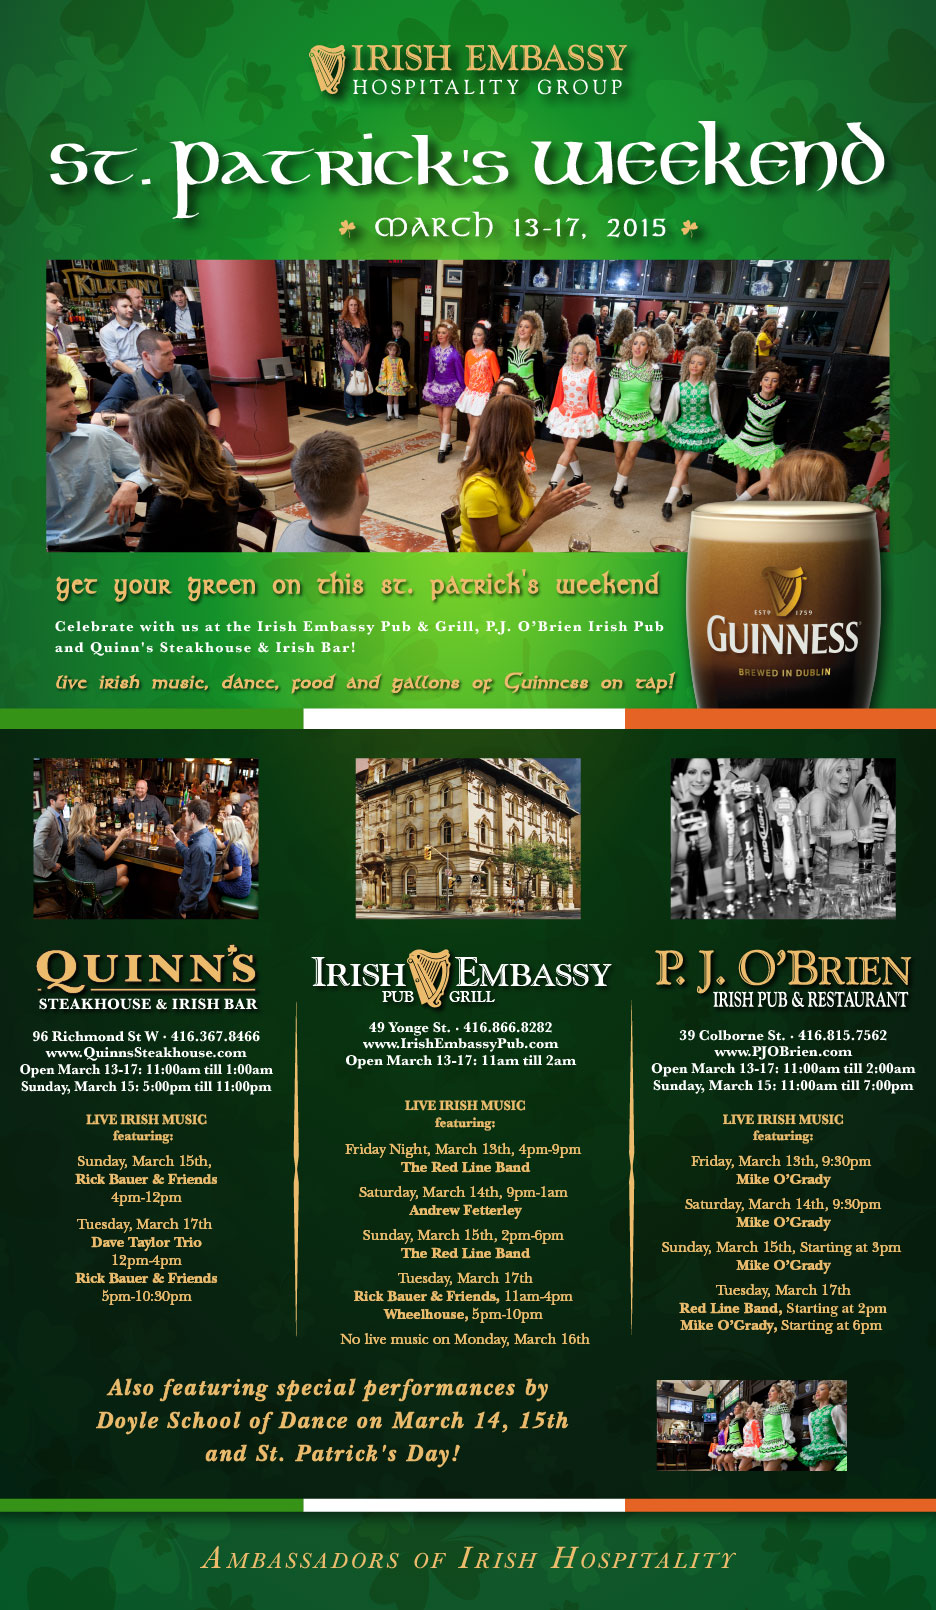 
			 
IRISH EMBASSY HOSPITALITY GROUP

ST. PATRICK'S WEEKEND

MARCH 13-17, 2015

Get your green on this St. Patrick's Weekend.

Celebrate with us at the Irish Embassy Pub & Grill, 
P.J. O'Brien Irish Pub and Quinn's Steakhouse & Irish Bar!

Live irish music, dance, food and gallons of Guinness on tap!


- - - - - - - - - - - - - - - - - - - - - - - - - - - - - - - - - - - - 


QUINN'S STEAKHOUSE & IRISH BAR

96 Richmond St W - 416.367.8466
www.QuinnsSteakhouse.com
Open March 13-17: 11:00am till 1:00am
Sunday, March 15: 5:00pm till 11:00pm

LIVE IRISH MUSIC - FEATURING:

Sunday, March 15th
Rick Bauer & Friends
4pm-12pm

Tuesday, March 17th 
Dave Taylor Trio
12pm-4pm
Rick Bauer & Friends
5pm-10:30pm

- - - - - - - - - - - - - - - - - - - - - - - - - - - - - - - - - - - - 


IRISH EMBASSY PUB & GRILL

49 Yonge St. - 416.866.8282
www.IrishEmbassyPub.com
Open March 13-17: 11:00am till 2:00am

LIVE IRISH MUSIC - FEATURING:

Friday Night, March 13th, 4pm-9pm 
The Red Line Band

Saturday, March 14th, 9pm-1am 
Andrew Fetterley

Sunday, March 15th, 2pm-6pm 
The Red Line Band

Tuesday, March 17th
Rick Bauer & Friends, 11am-4pm 
Wheelhouse, 5pm-10pm 
No live music on Monday, March 16th


- - - - - - - - - - - - - - - - - - - - - - - - - - - - - - - - - - - - 

P.J. O'BRIEN IRISH PUB & RESTAURANT

39 Colborne St. - 416.815.7562
www.PJOBrien.com
Open March 13-17: 11:00am till 2:00am
Sunday, March 15: 11:00am till 7:00pm

LIVE IRISH MUSIC - FEATURING:

Friday, March 13th, 9:30pm 
Mike O'Grady

Saturday, March 14th, 9:30pm
Mike O'Grady

Sunday, March 15th, Starting at 3pm 
Mike O'Grady

Tuesday, March 17th
Red Line Band, Starting at 2pm
Mike O'Grady, Starting at 6pm 


- - - - - - - - - - - - - - - - - - - - - - - - - - - - - - - - - - - - 

Also featuring special performances by 
the Doyle School of Dance on 
March 14, 15th and St. Patrick's Day!

- - - - - - - - - - - - - - - - - - - - - - - - - - - - - - - - - - - - 

Ambassadors of Irish Hospitality
	


		